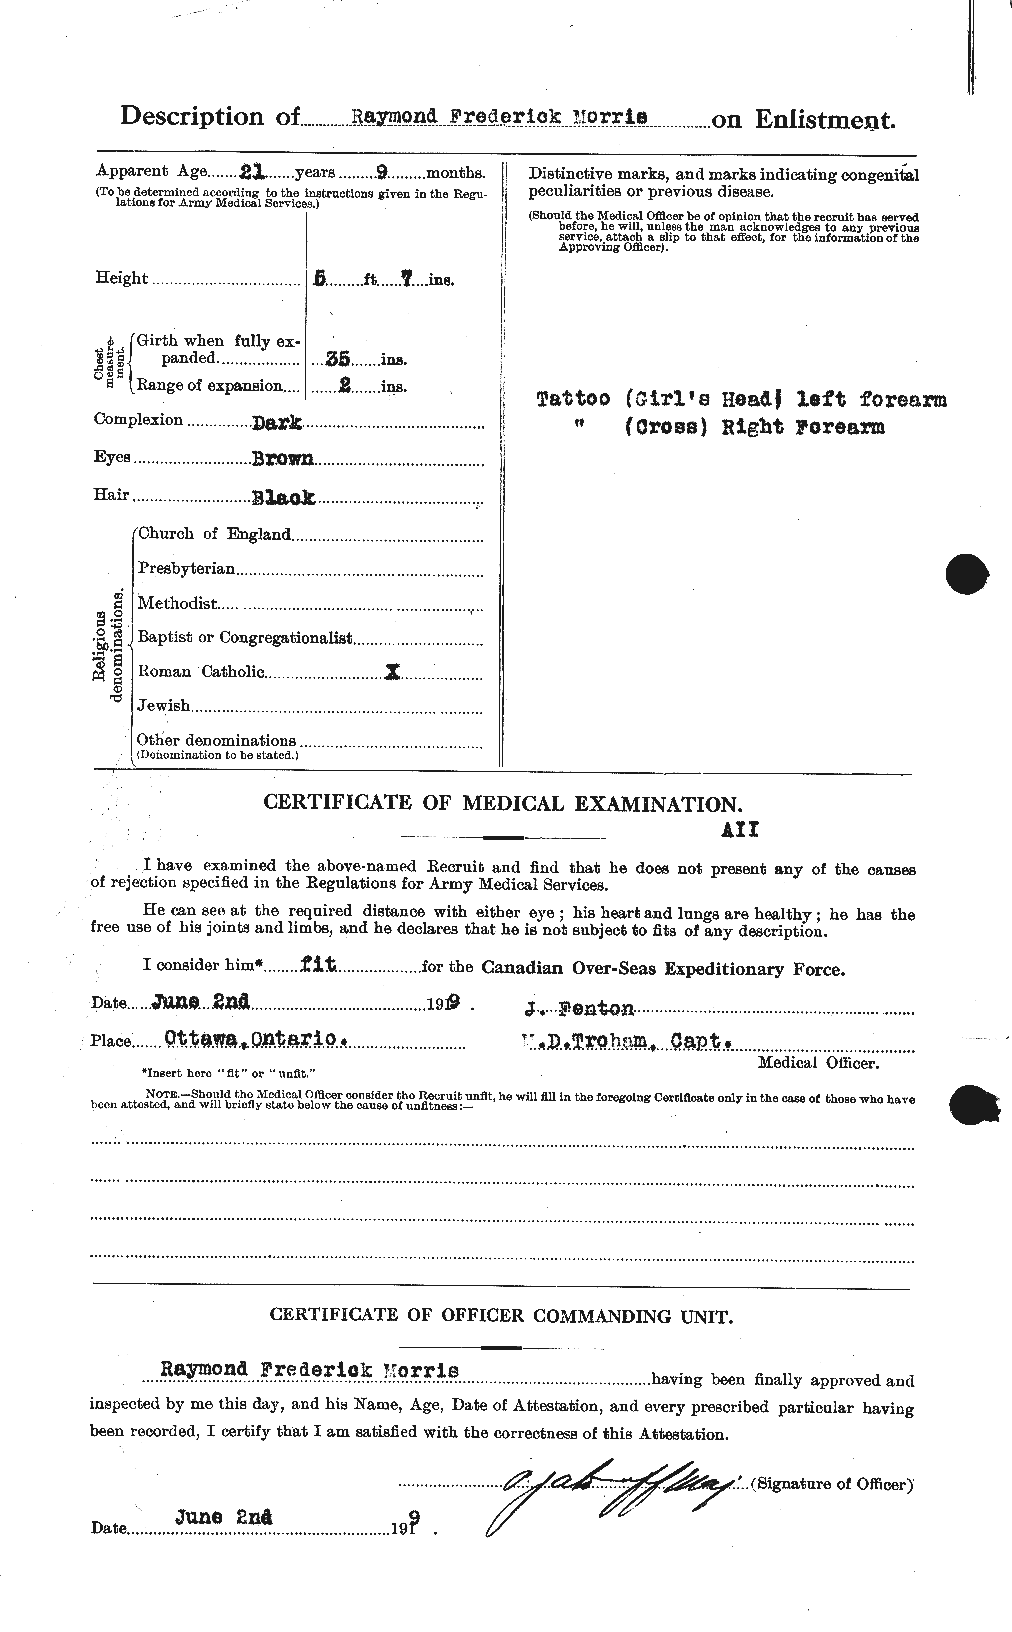 Personnel Records of the First World War - CEF 508627b